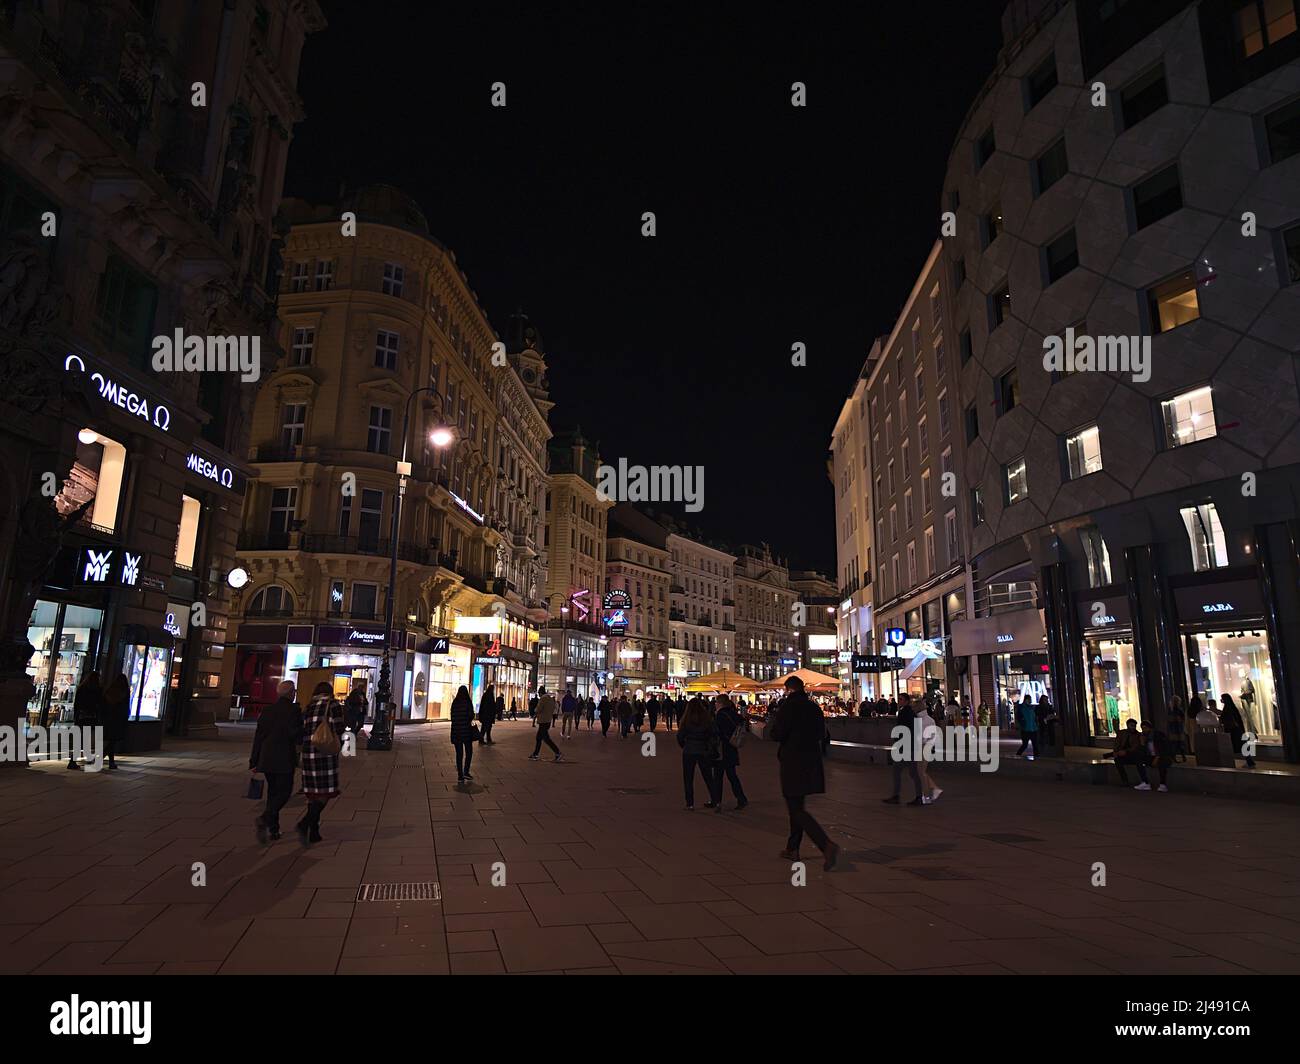 View of shopping street Graben at night near Stephansplatz in the historic center of Vienna, Austria, with people walking by and illuminated shops. Stock Photo